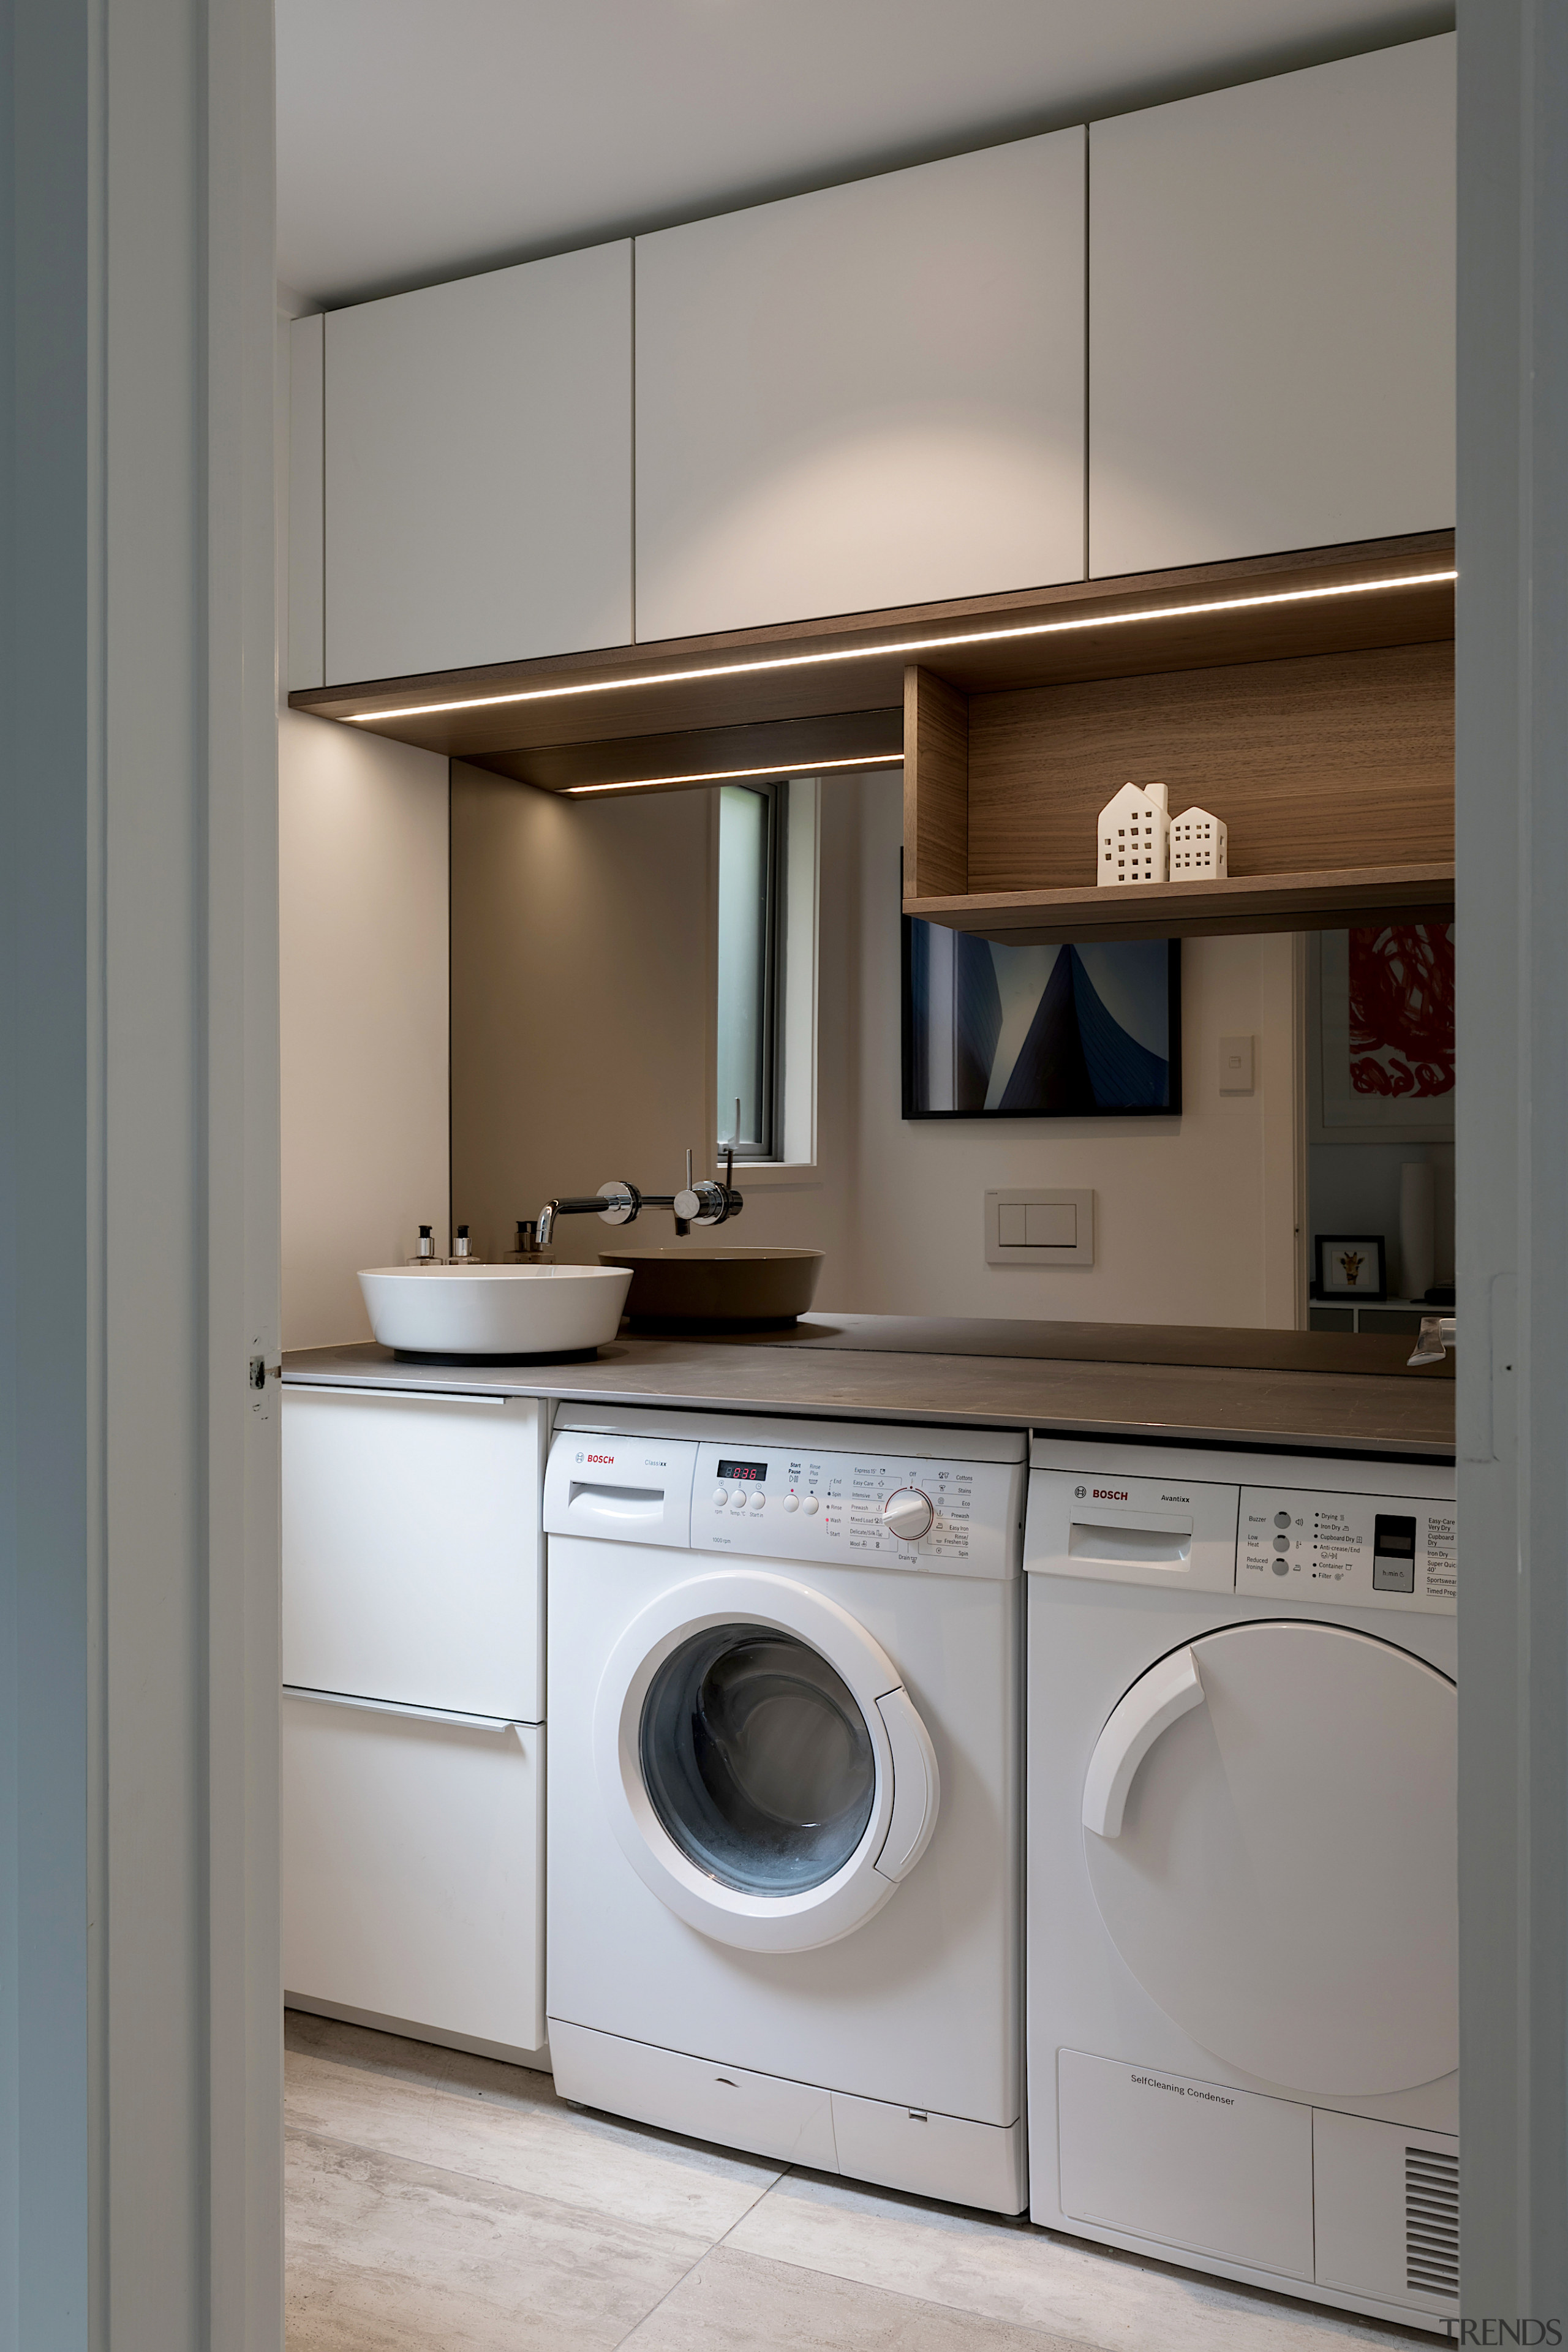 Designer Lara Farmillo designed the laundry in this architecture, building, cabinetry, clothes dryer, countertop, cupboard, floor, furniture, home appliance, house, interior design, kitchen, laundry, laundry room, major appliance, material property, property, room, washing machine, gray